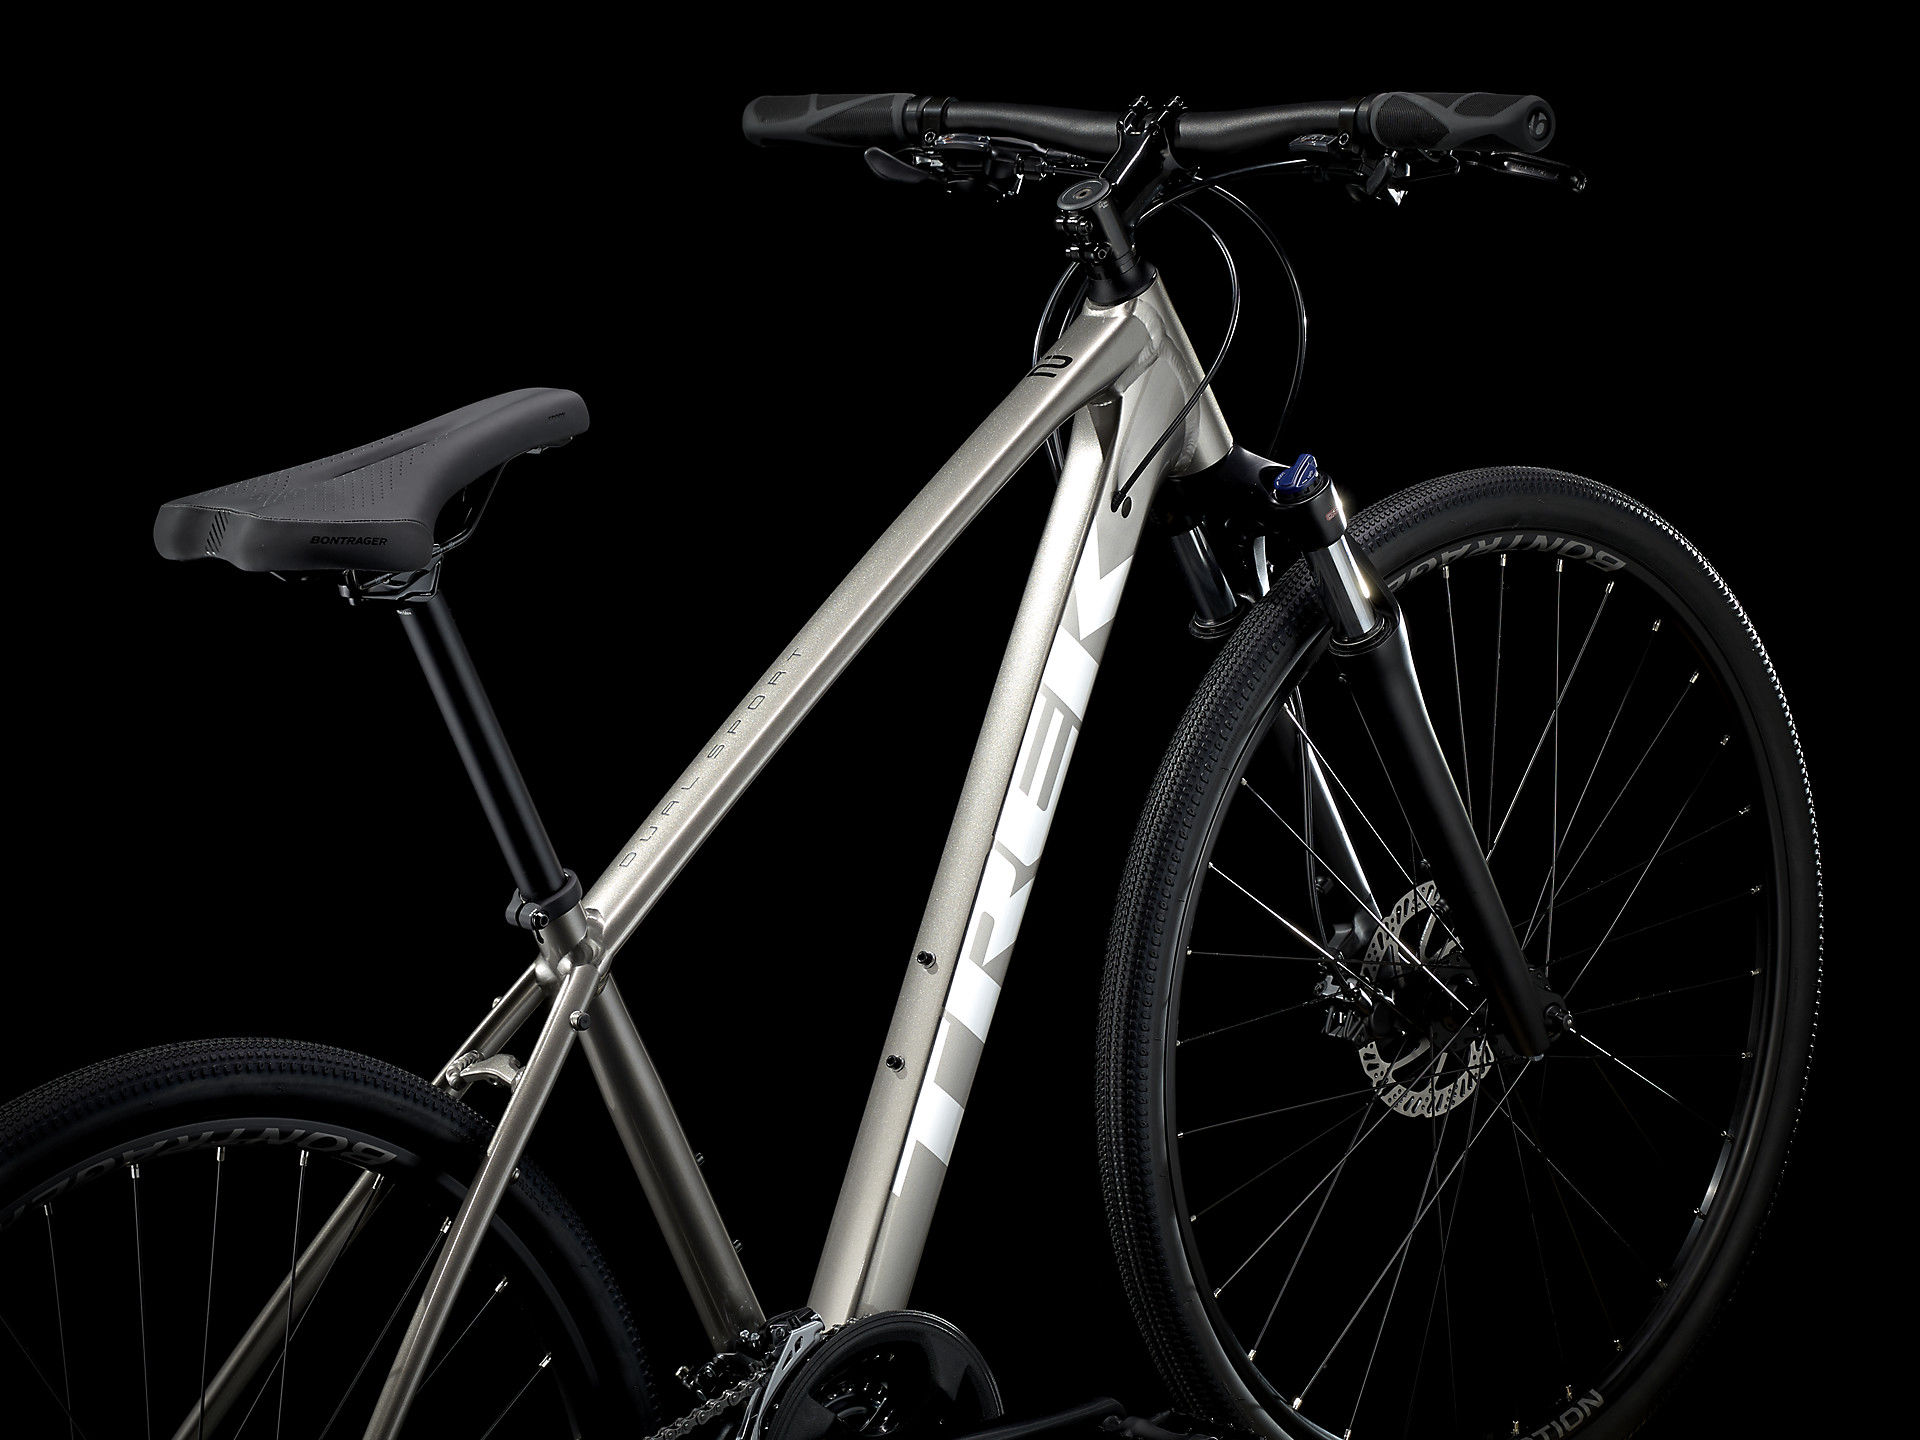 compare trek dual sport 2 and 3